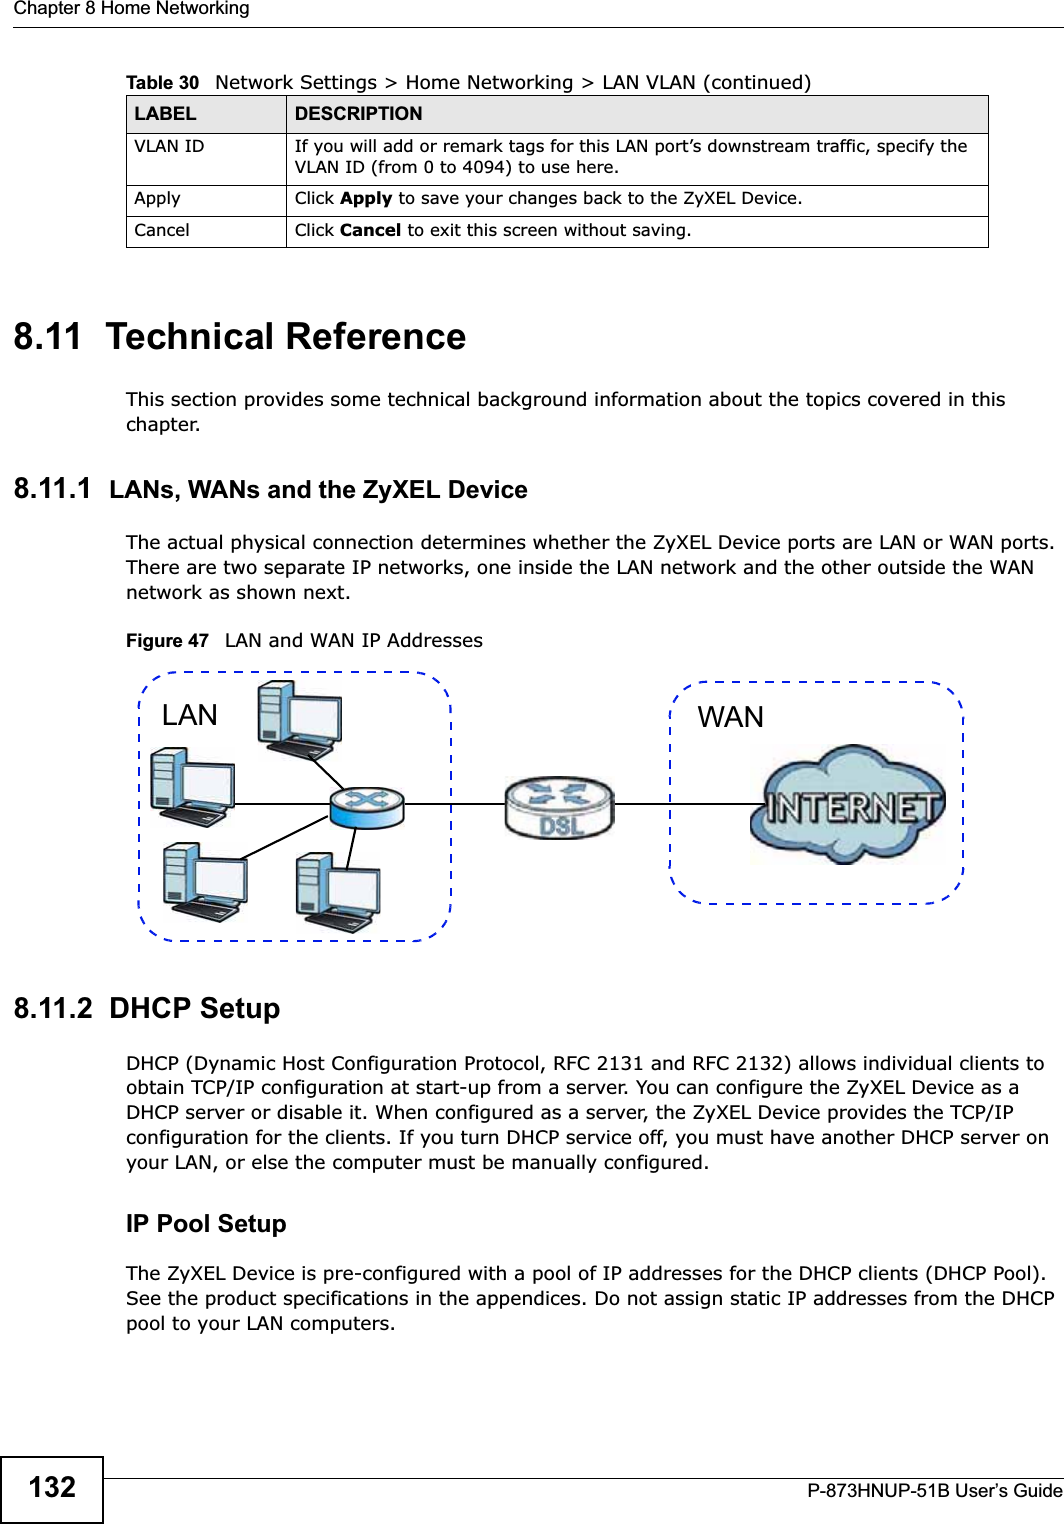 Chapter 8 Home NetworkingP-873HNUP-51B User’s Guide1328.11  Technical ReferenceThis section provides some technical background information about the topics covered in this chapter.8.11.1  LANs, WANs and the ZyXEL DeviceThe actual physical connection determines whether the ZyXEL Device ports are LAN or WAN ports. There are two separate IP networks, one inside the LAN network and the other outside the WAN network as shown next.Figure 47   LAN and WAN IP Addresses8.11.2  DHCP SetupDHCP (Dynamic Host Configuration Protocol, RFC 2131 and RFC 2132) allows individual clients to obtain TCP/IP configuration at start-up from a server. You can configure the ZyXEL Device as a DHCP server or disable it. When configured as a server, the ZyXEL Device provides the TCP/IP configuration for the clients. If you turn DHCP service off, you must have another DHCP server on your LAN, or else the computer must be manually configured. IP Pool SetupThe ZyXEL Device is pre-configured with a pool of IP addresses for the DHCP clients (DHCP Pool). See the product specifications in the appendices. Do not assign static IP addresses from the DHCP pool to your LAN computers.VLAN ID If you will add or remark tags for this LAN port’s downstream traffic, specify the VLAN ID (from 0 to 4094) to use here.Apply Click Apply to save your changes back to the ZyXEL Device.Cancel Click Cancel to exit this screen without saving.Table 30   Network Settings &gt; Home Networking &gt; LAN VLAN (continued)LABEL DESCRIPTIONWANLAN